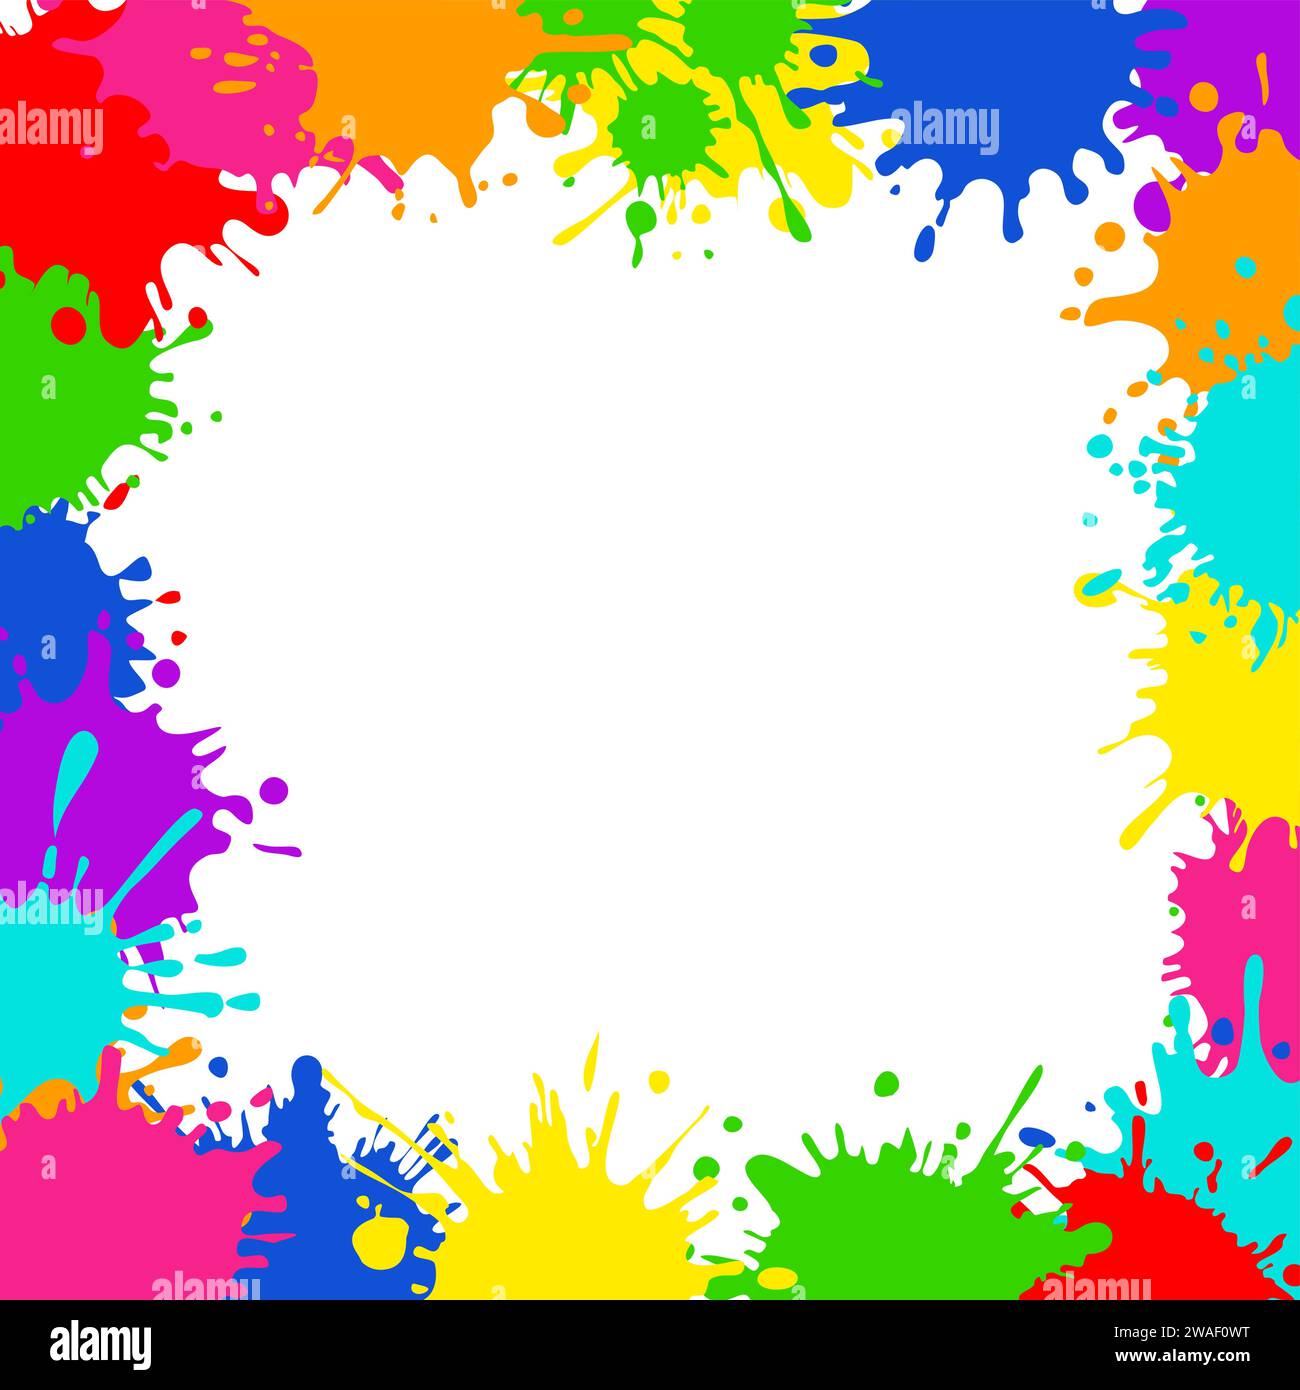 Bright colorful banner. Horizontal banner with colorful paint spots and splashes. Colorful blots, multicolored splash spray paints. Frame background Stock Vector